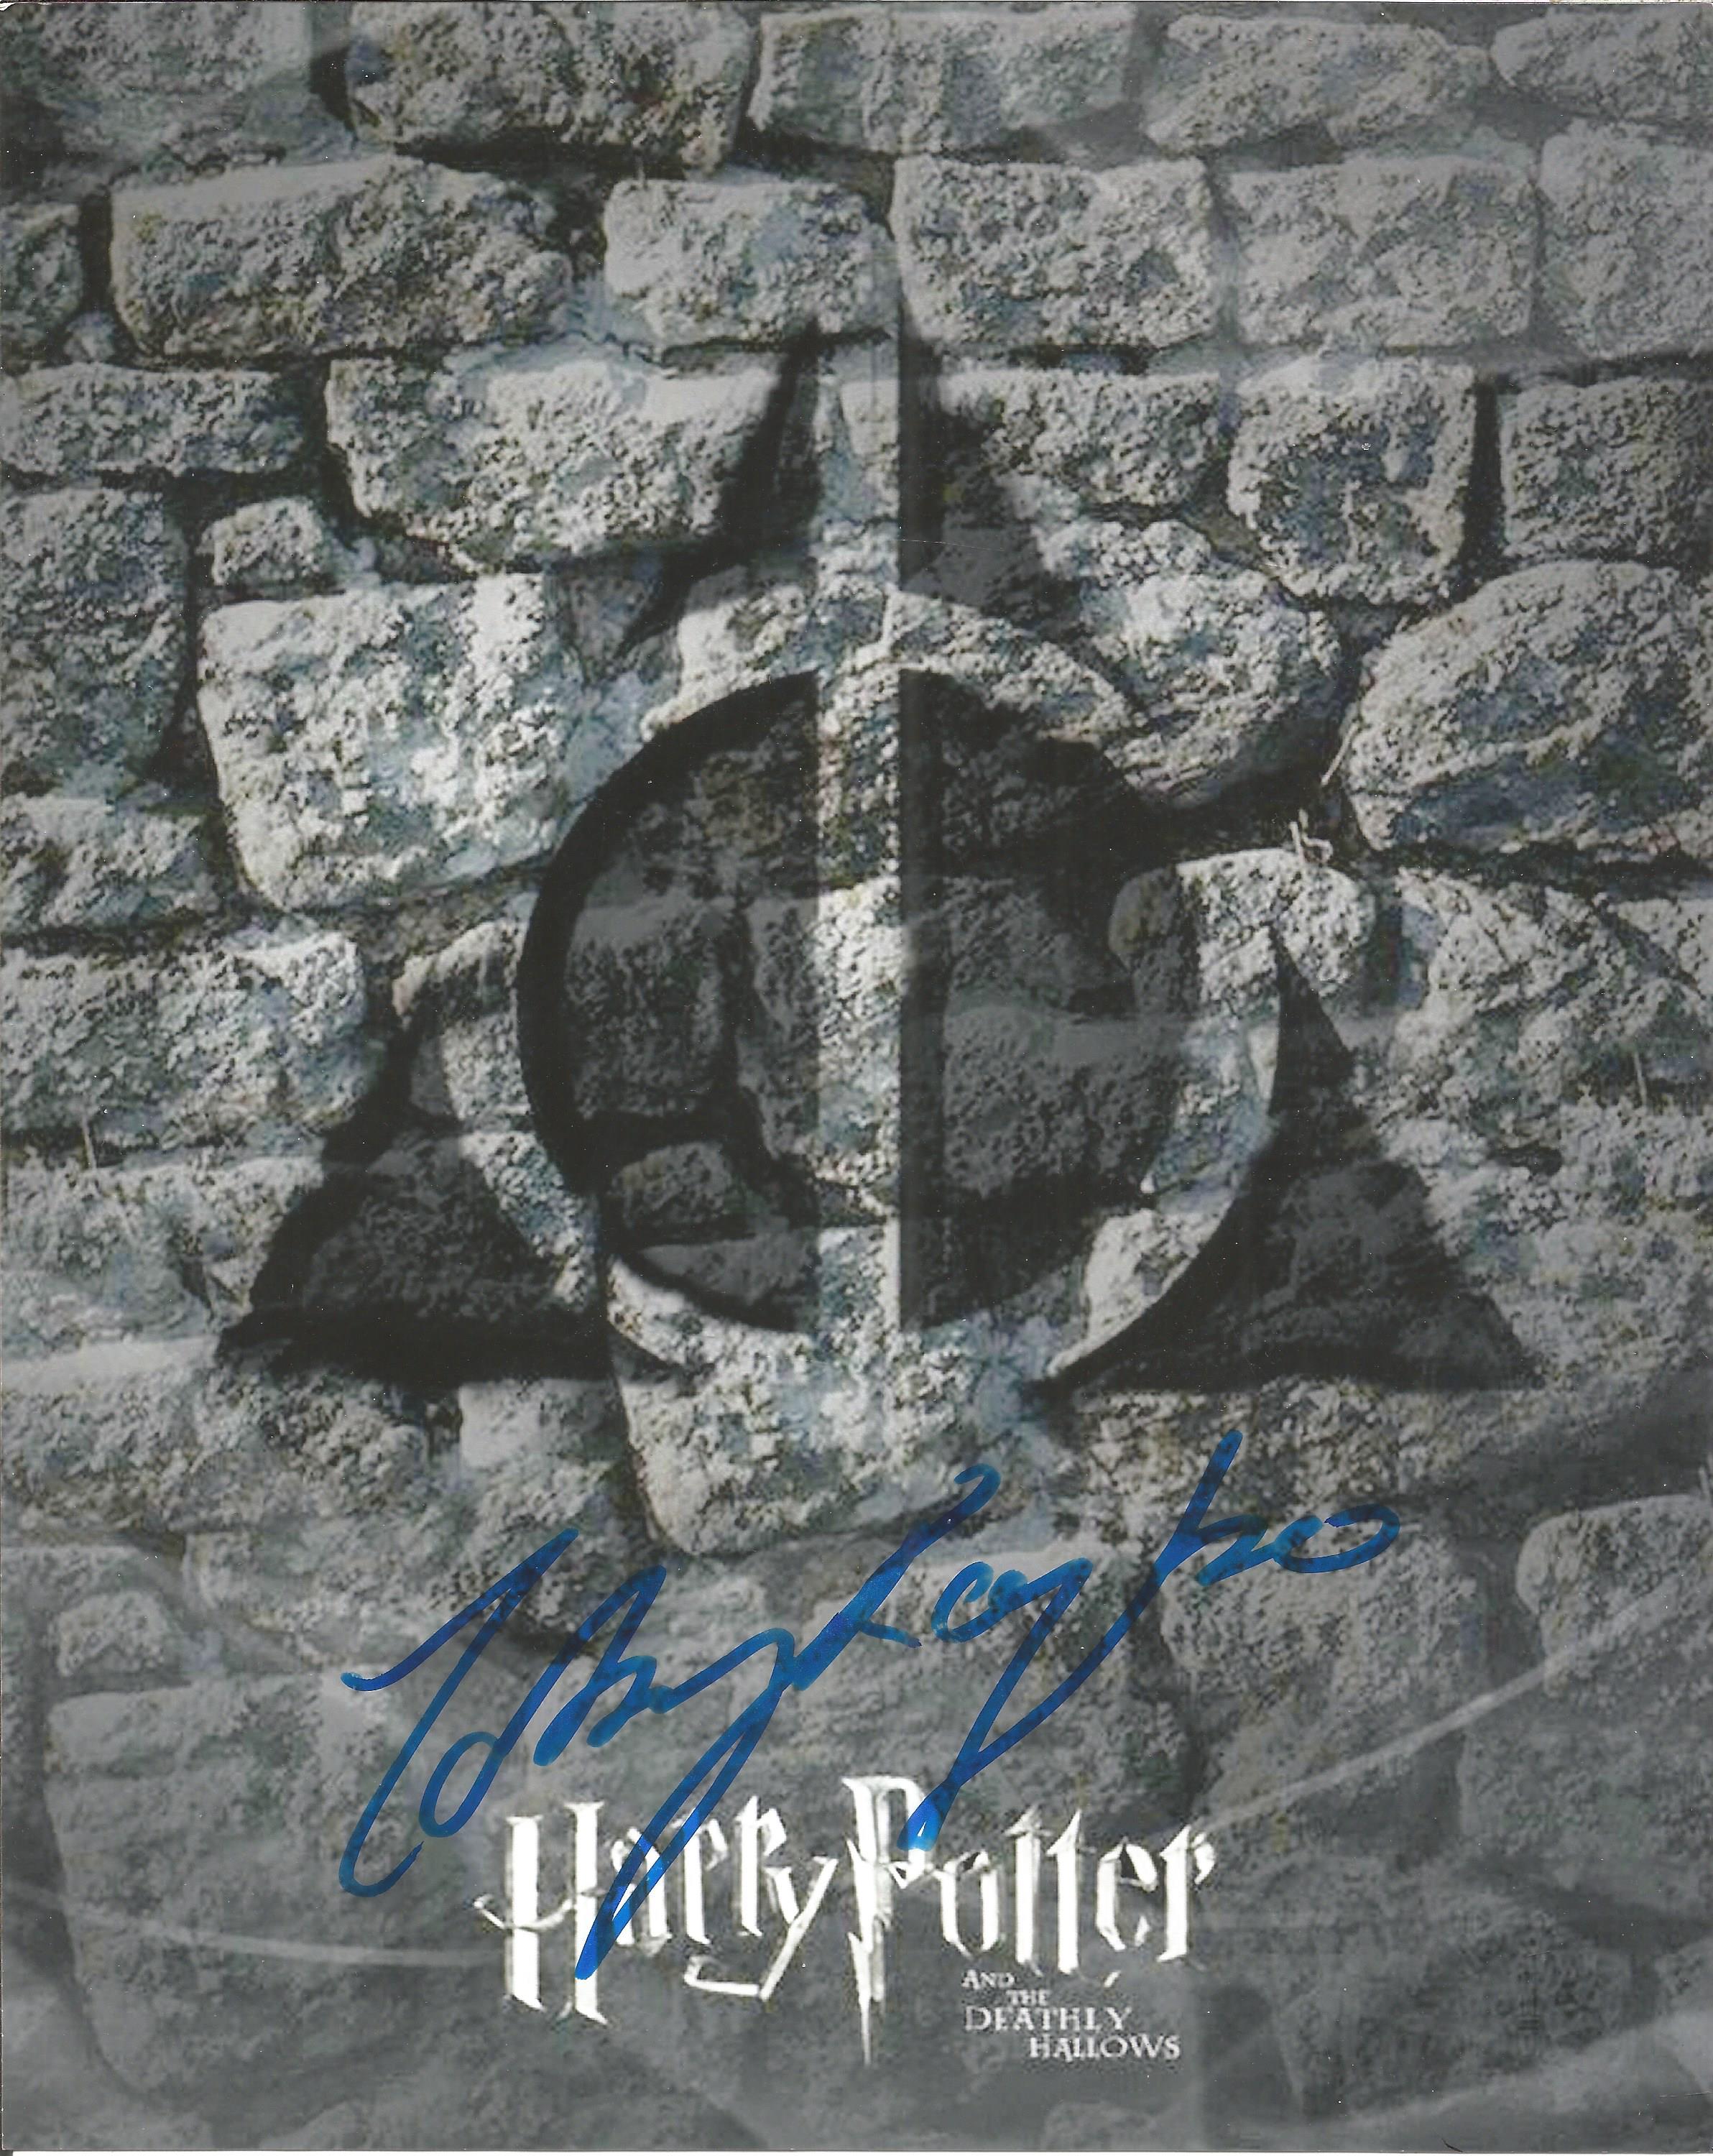 Harry Potter and the Deathly Hallows signed 10x8 colour image. Good condition. All autographs come